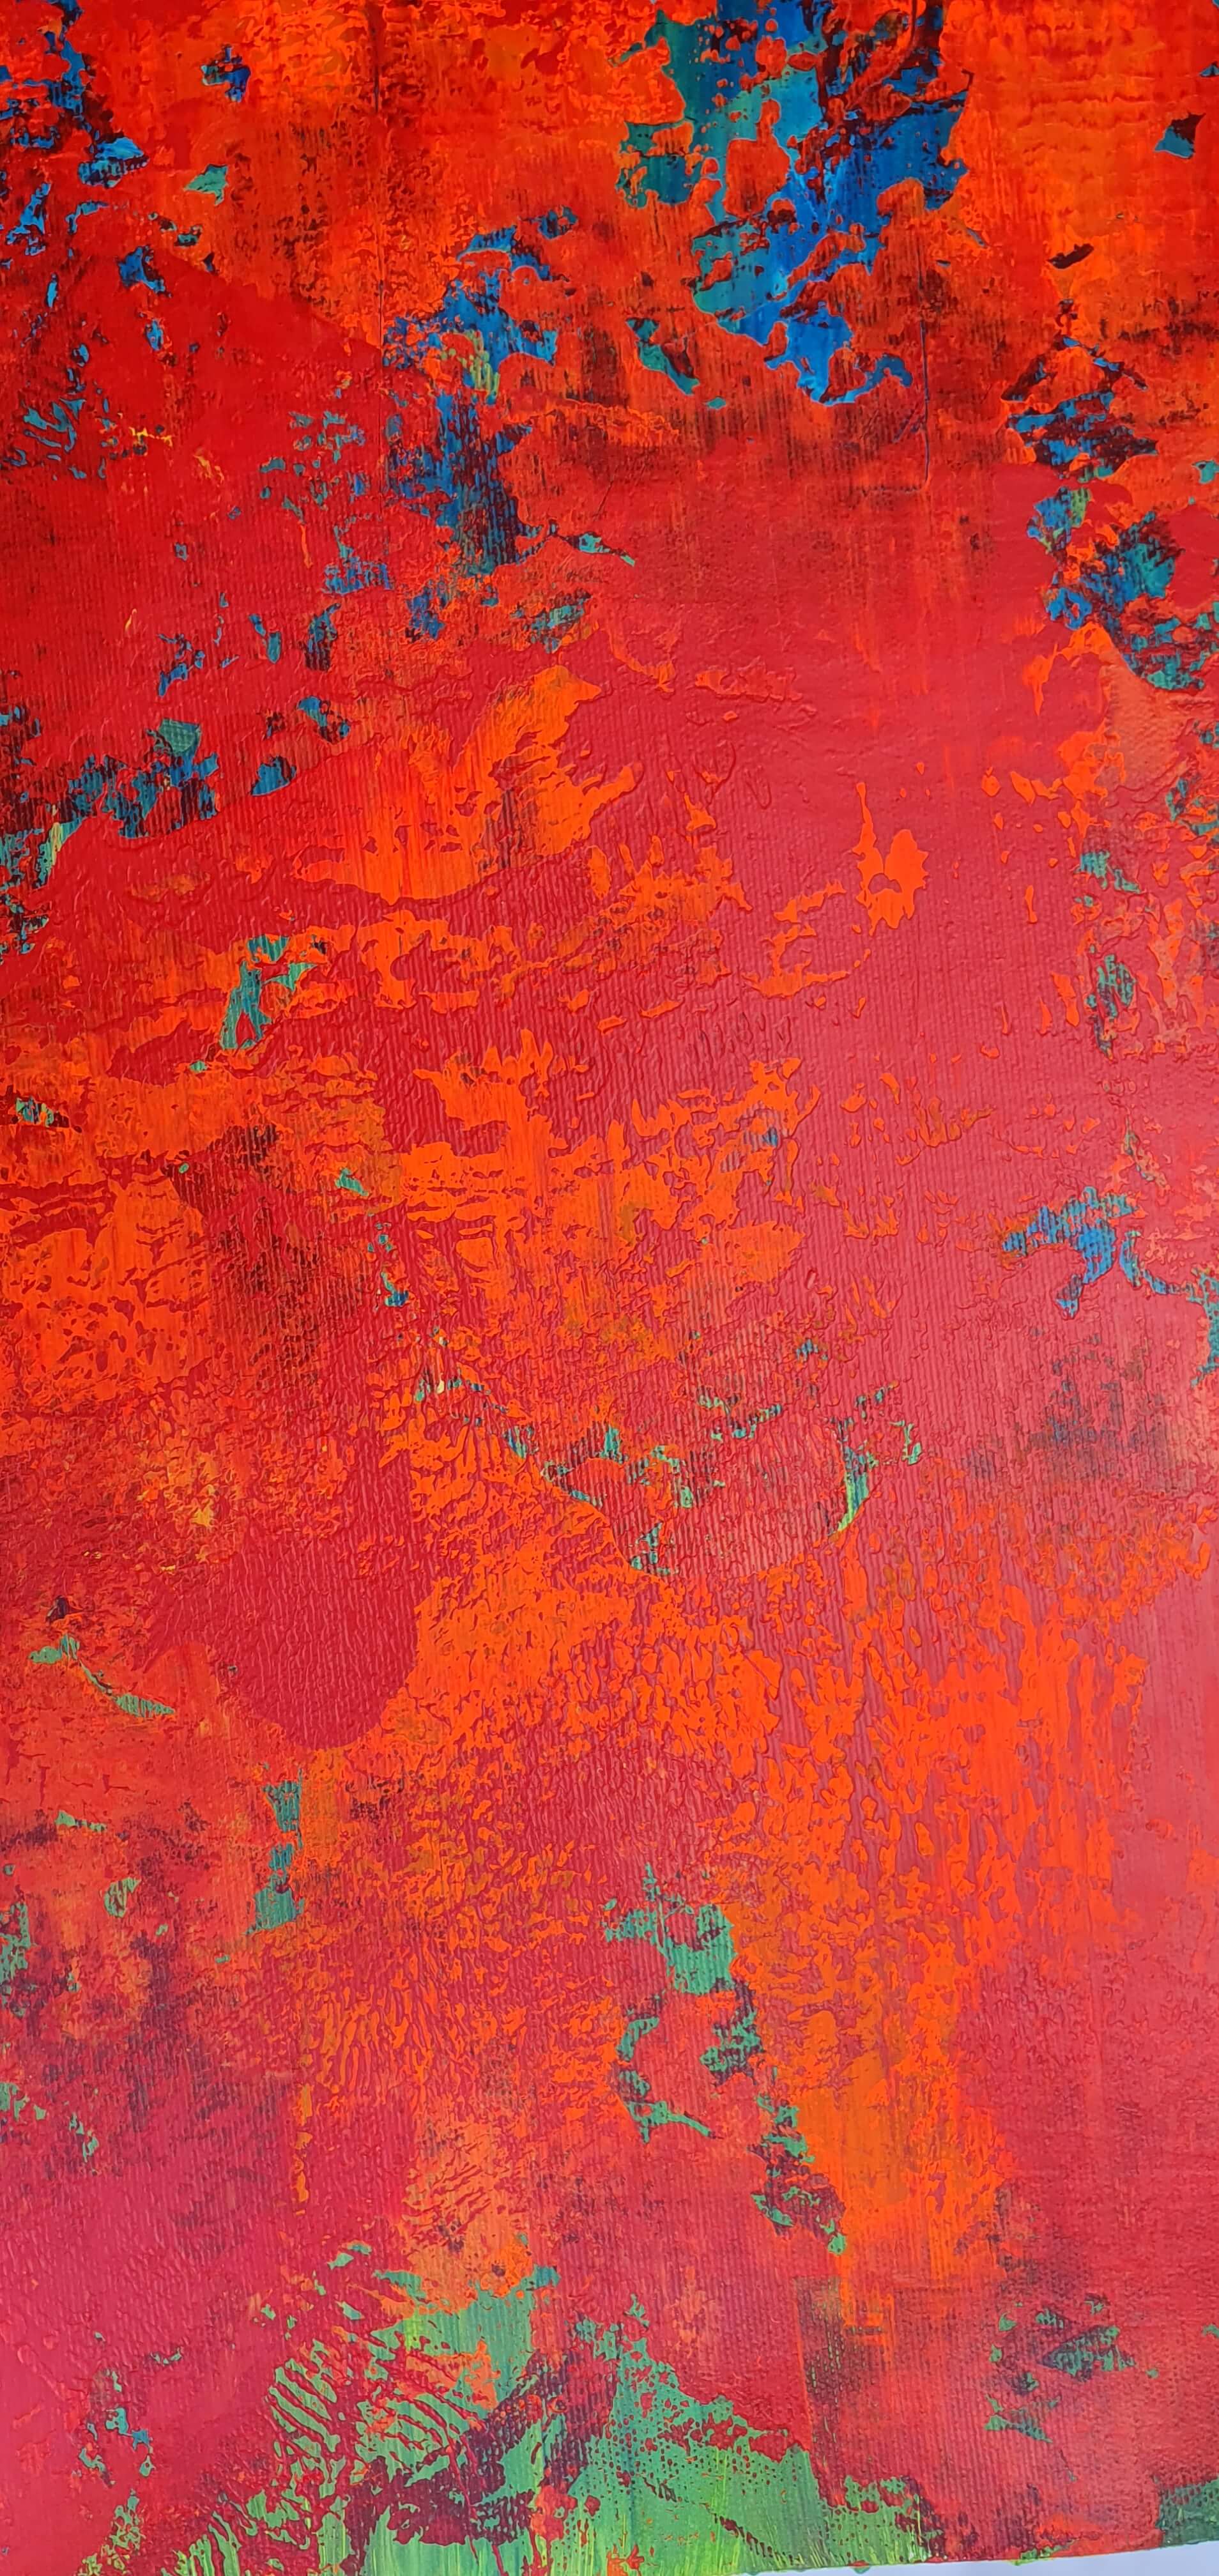 Large Red Modern Abstract Painting Urban Original Art on Stretched Canvas  24x36 on Michael: Tuesdays and Thursdays TV show Custom - Art by Nathalie  Van